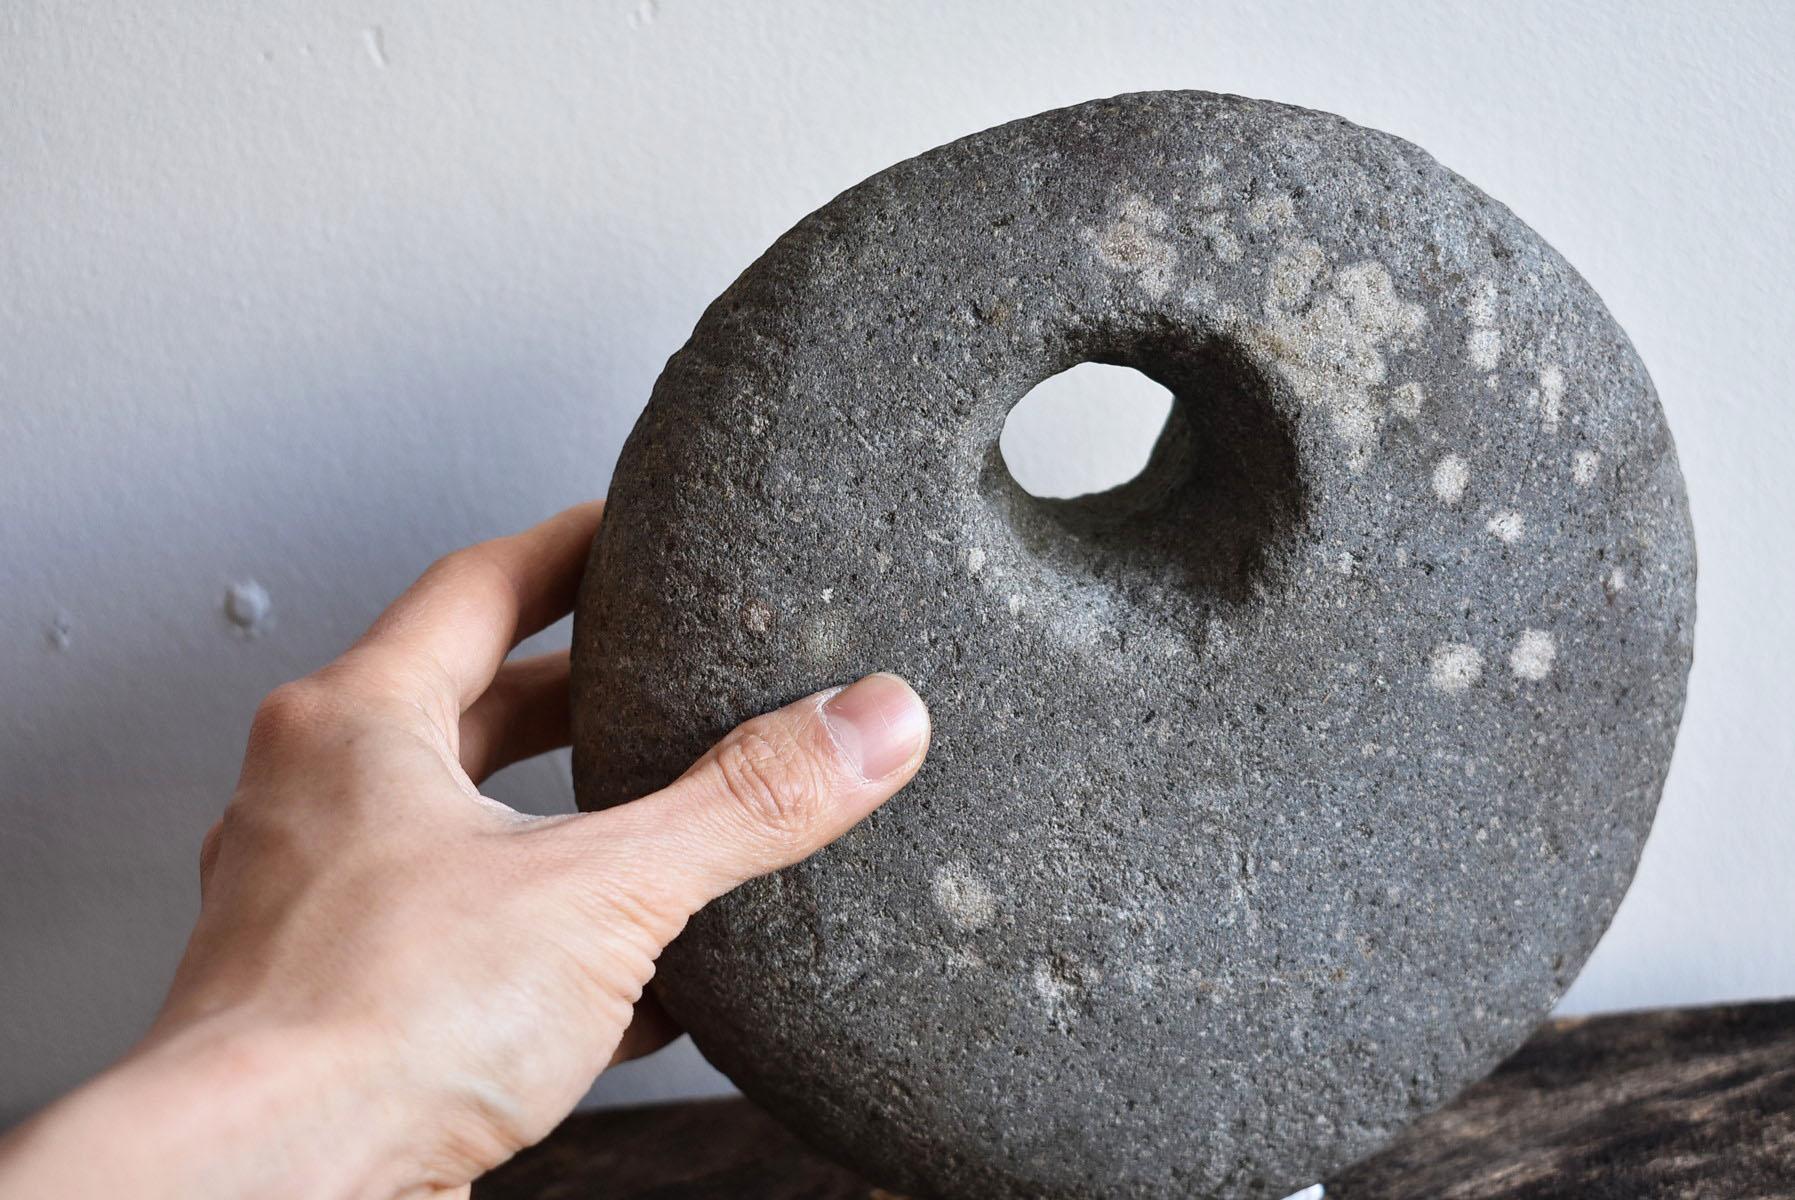 Japanese Antique Disc Stone with Holes / Appreciation Stone / Scholar's Stone 2